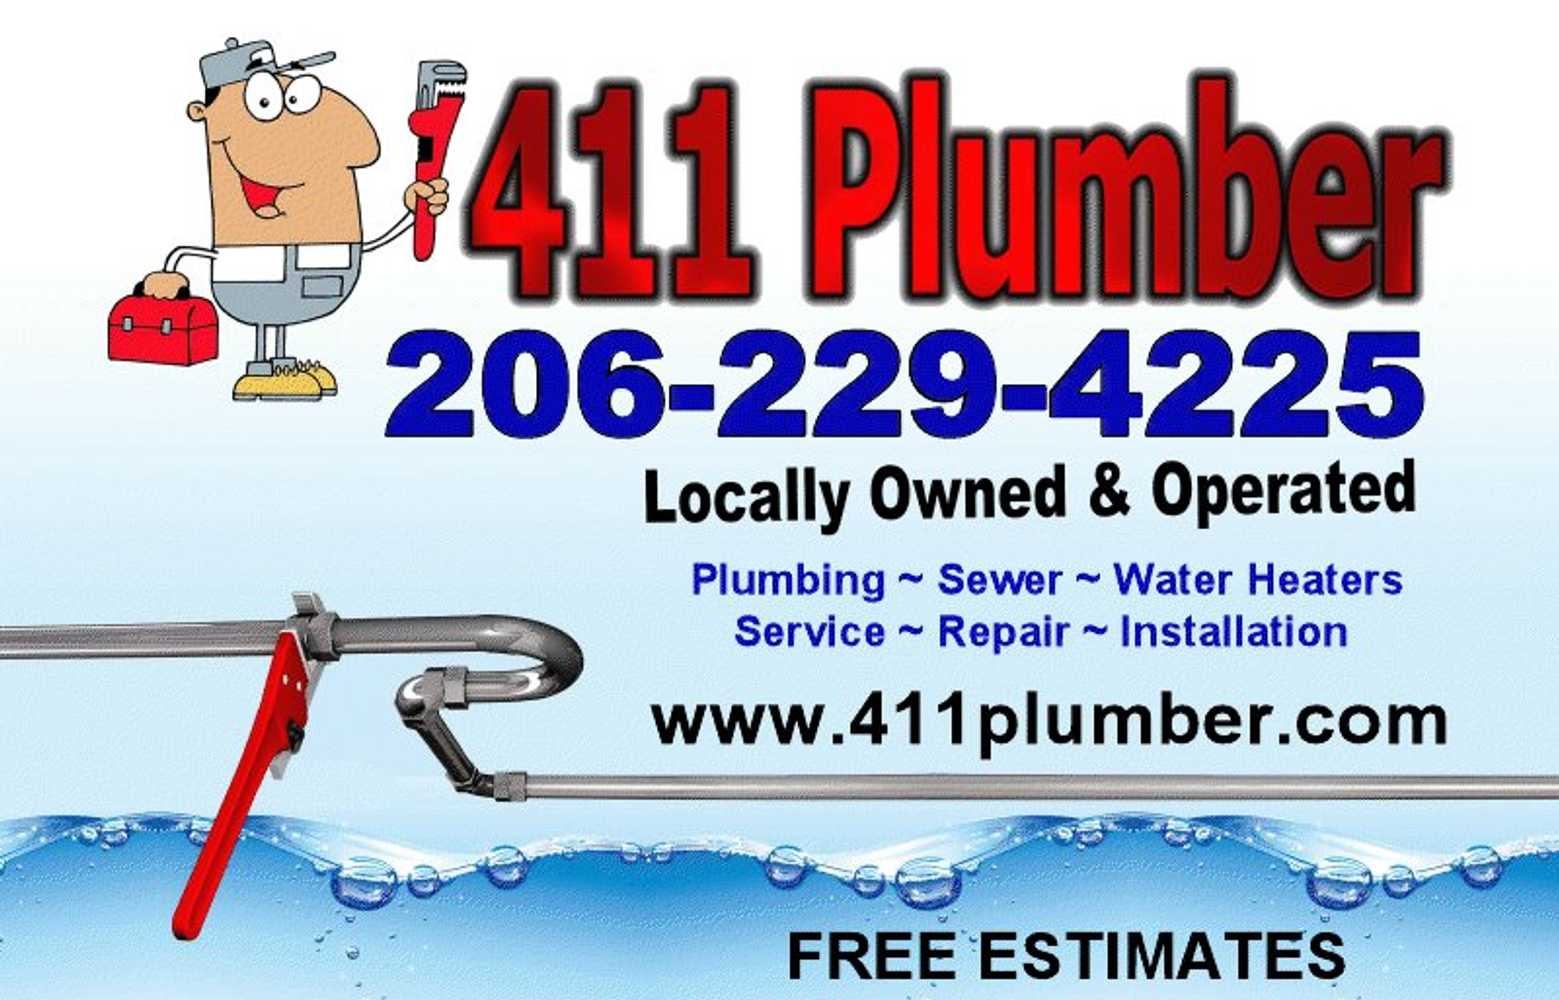 Photo(s) from 411 Plumber